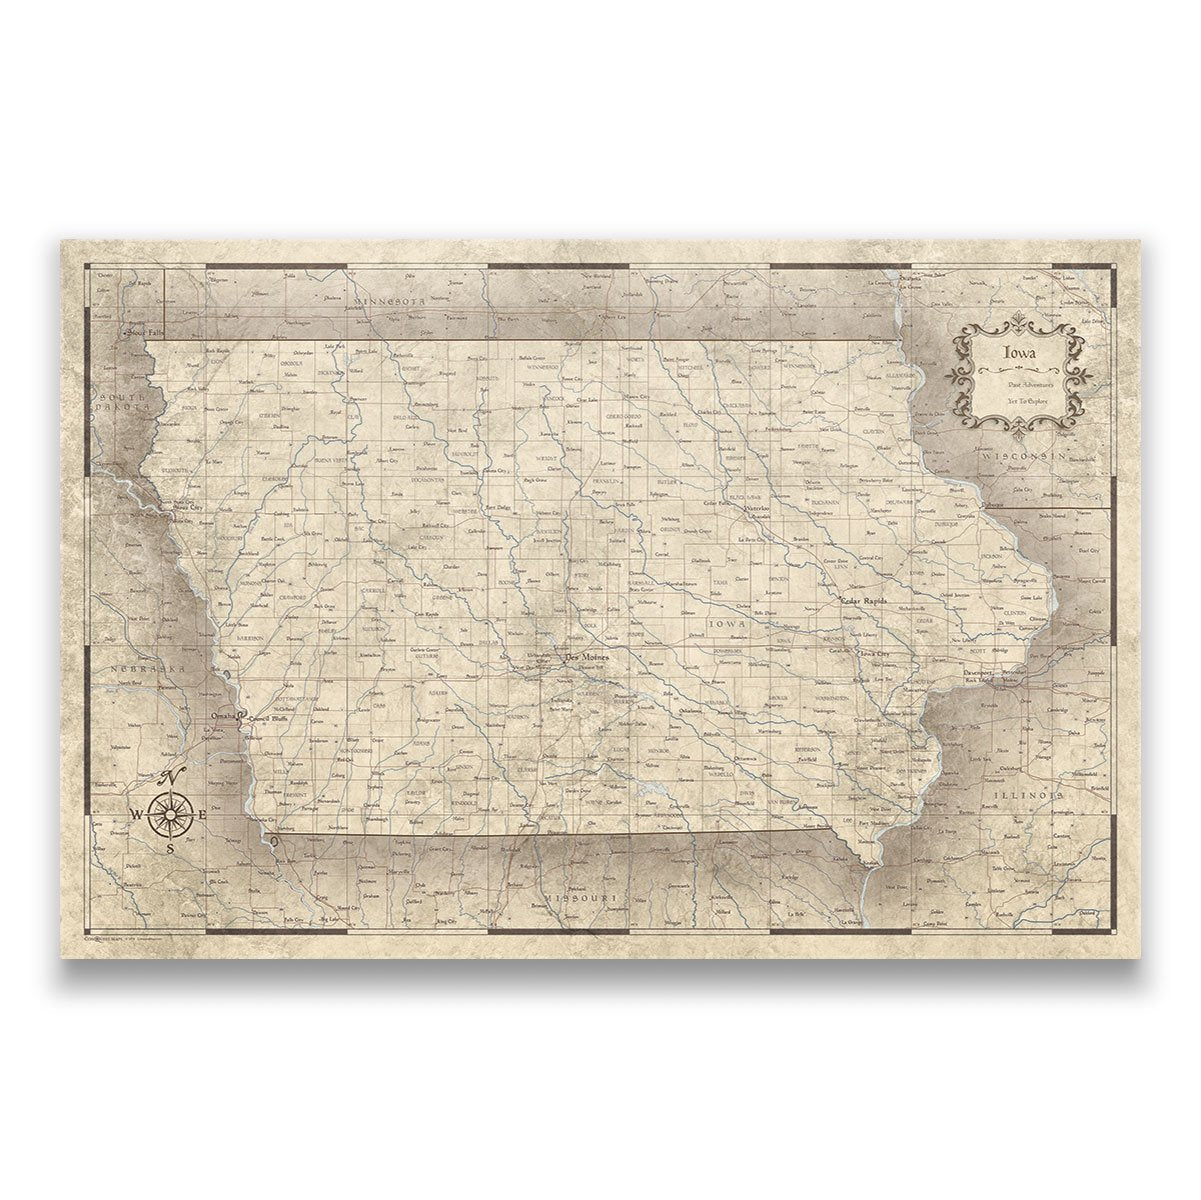 Track Your Travels on a Personalized Iowa Wall Map